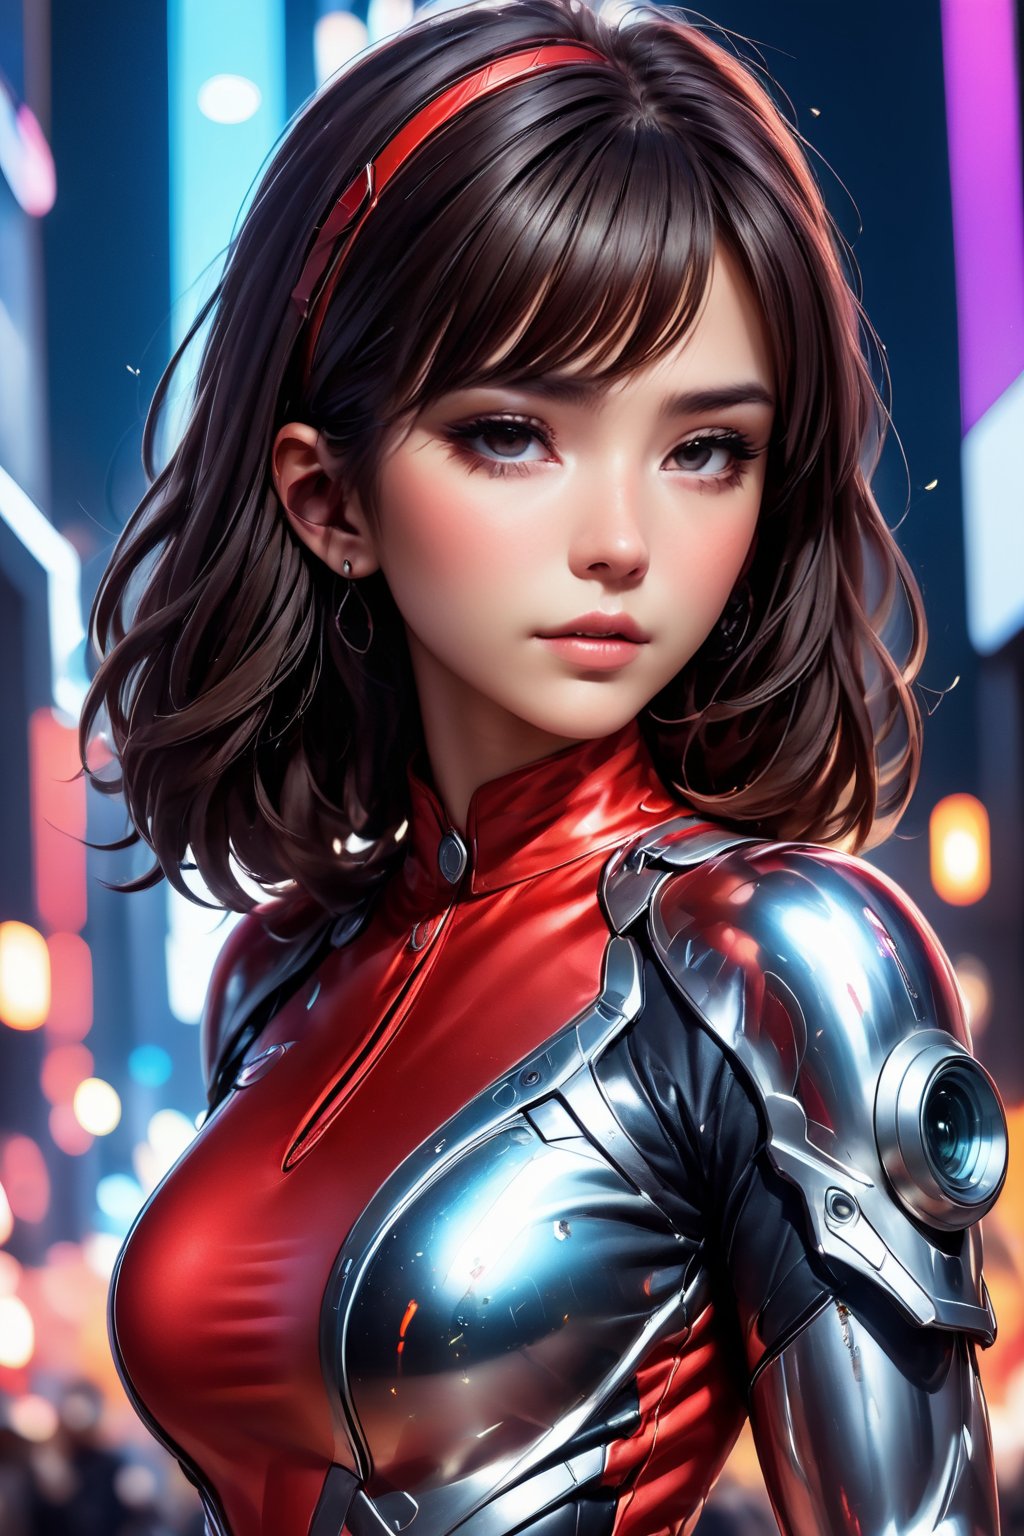 1 girl, fiery red jacket, tight suit,Space helm of the 1960s,and the anime series G Force of the 1980s,Ghost In The Shell style, Darf Punk wlop glossy skin, ultrarealistic sweet girl, space helm 60s, holographic, holographic texture, the style of wlop, space, stands on a pedestal,( with spaceships in the background)